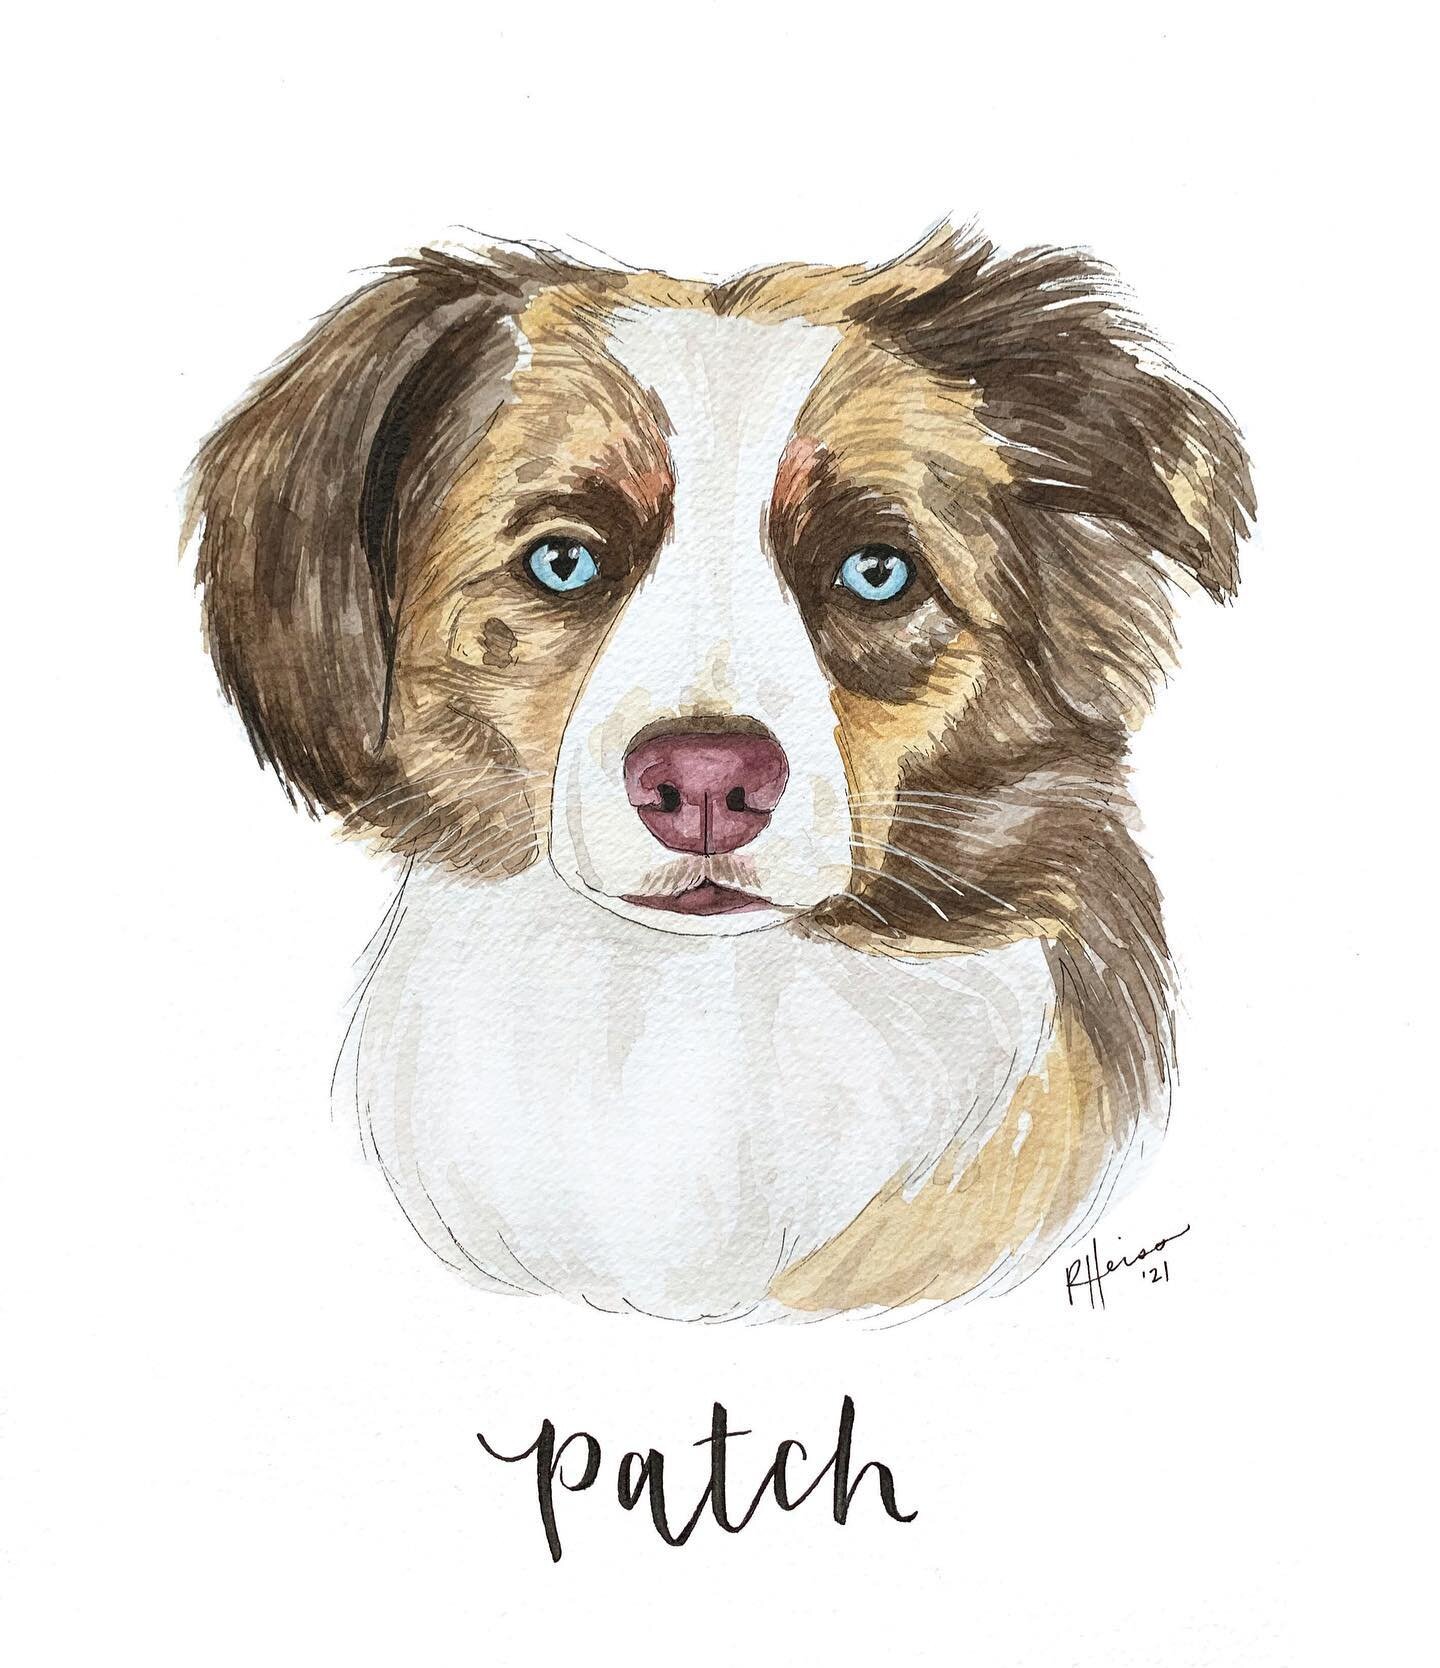 Patch: Has GoT Night King eyes, will not laugh at your jokes or fall for your fake treat trick, better trained than any employee of the month.

8&rdquo;x10&rdquo; watercolor + pen pet portrait from January